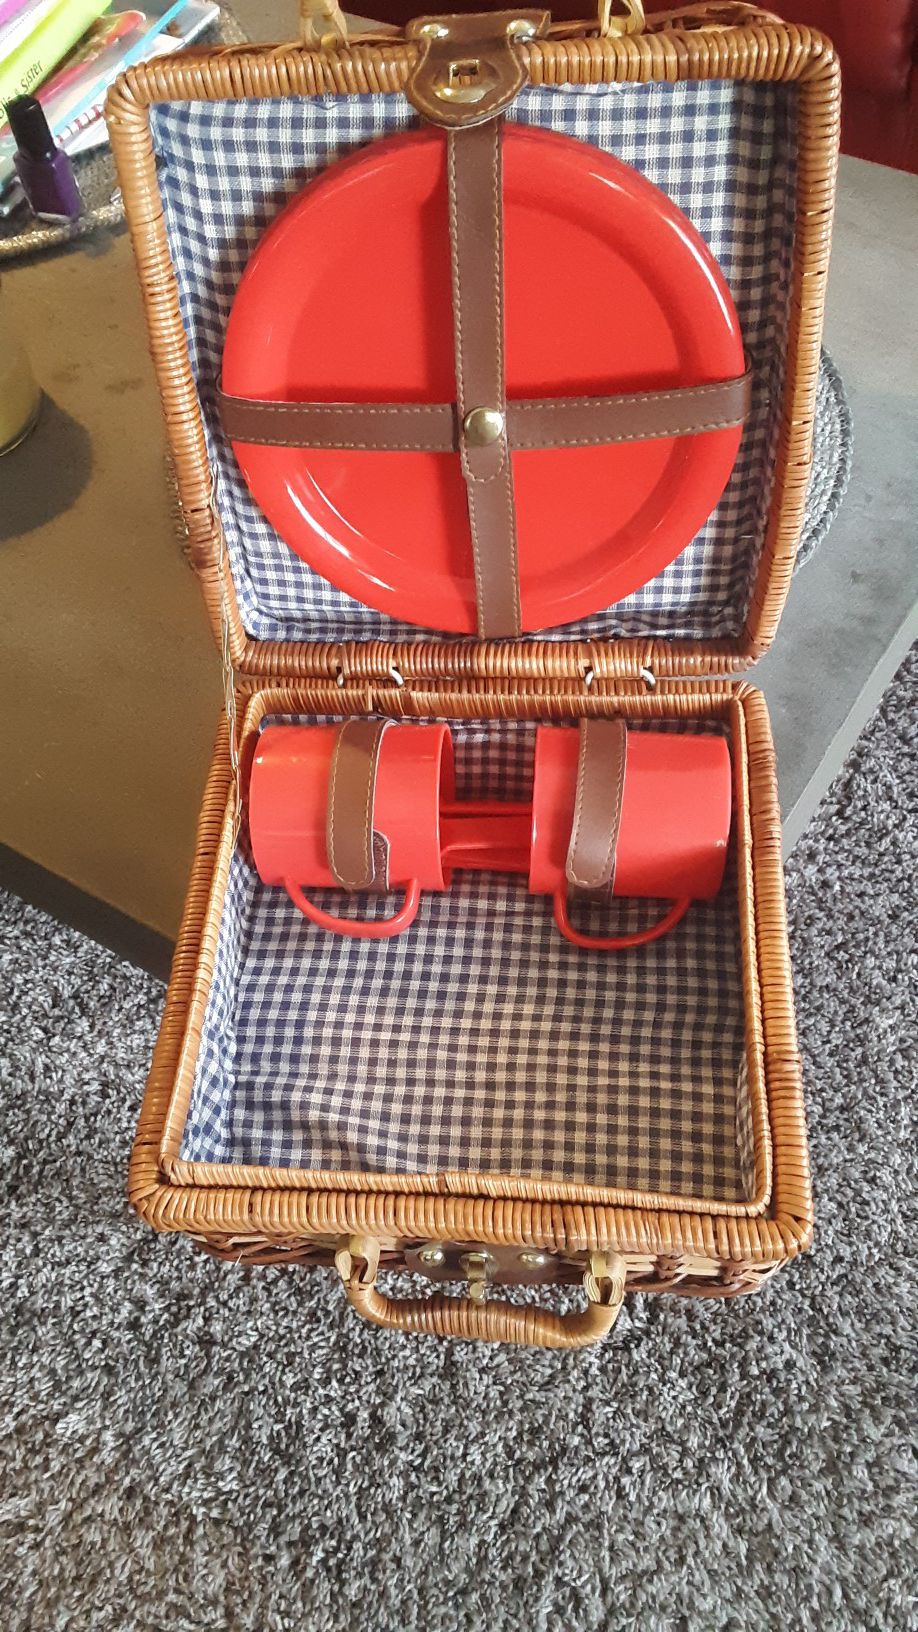 Small picnic basket for one or two, new